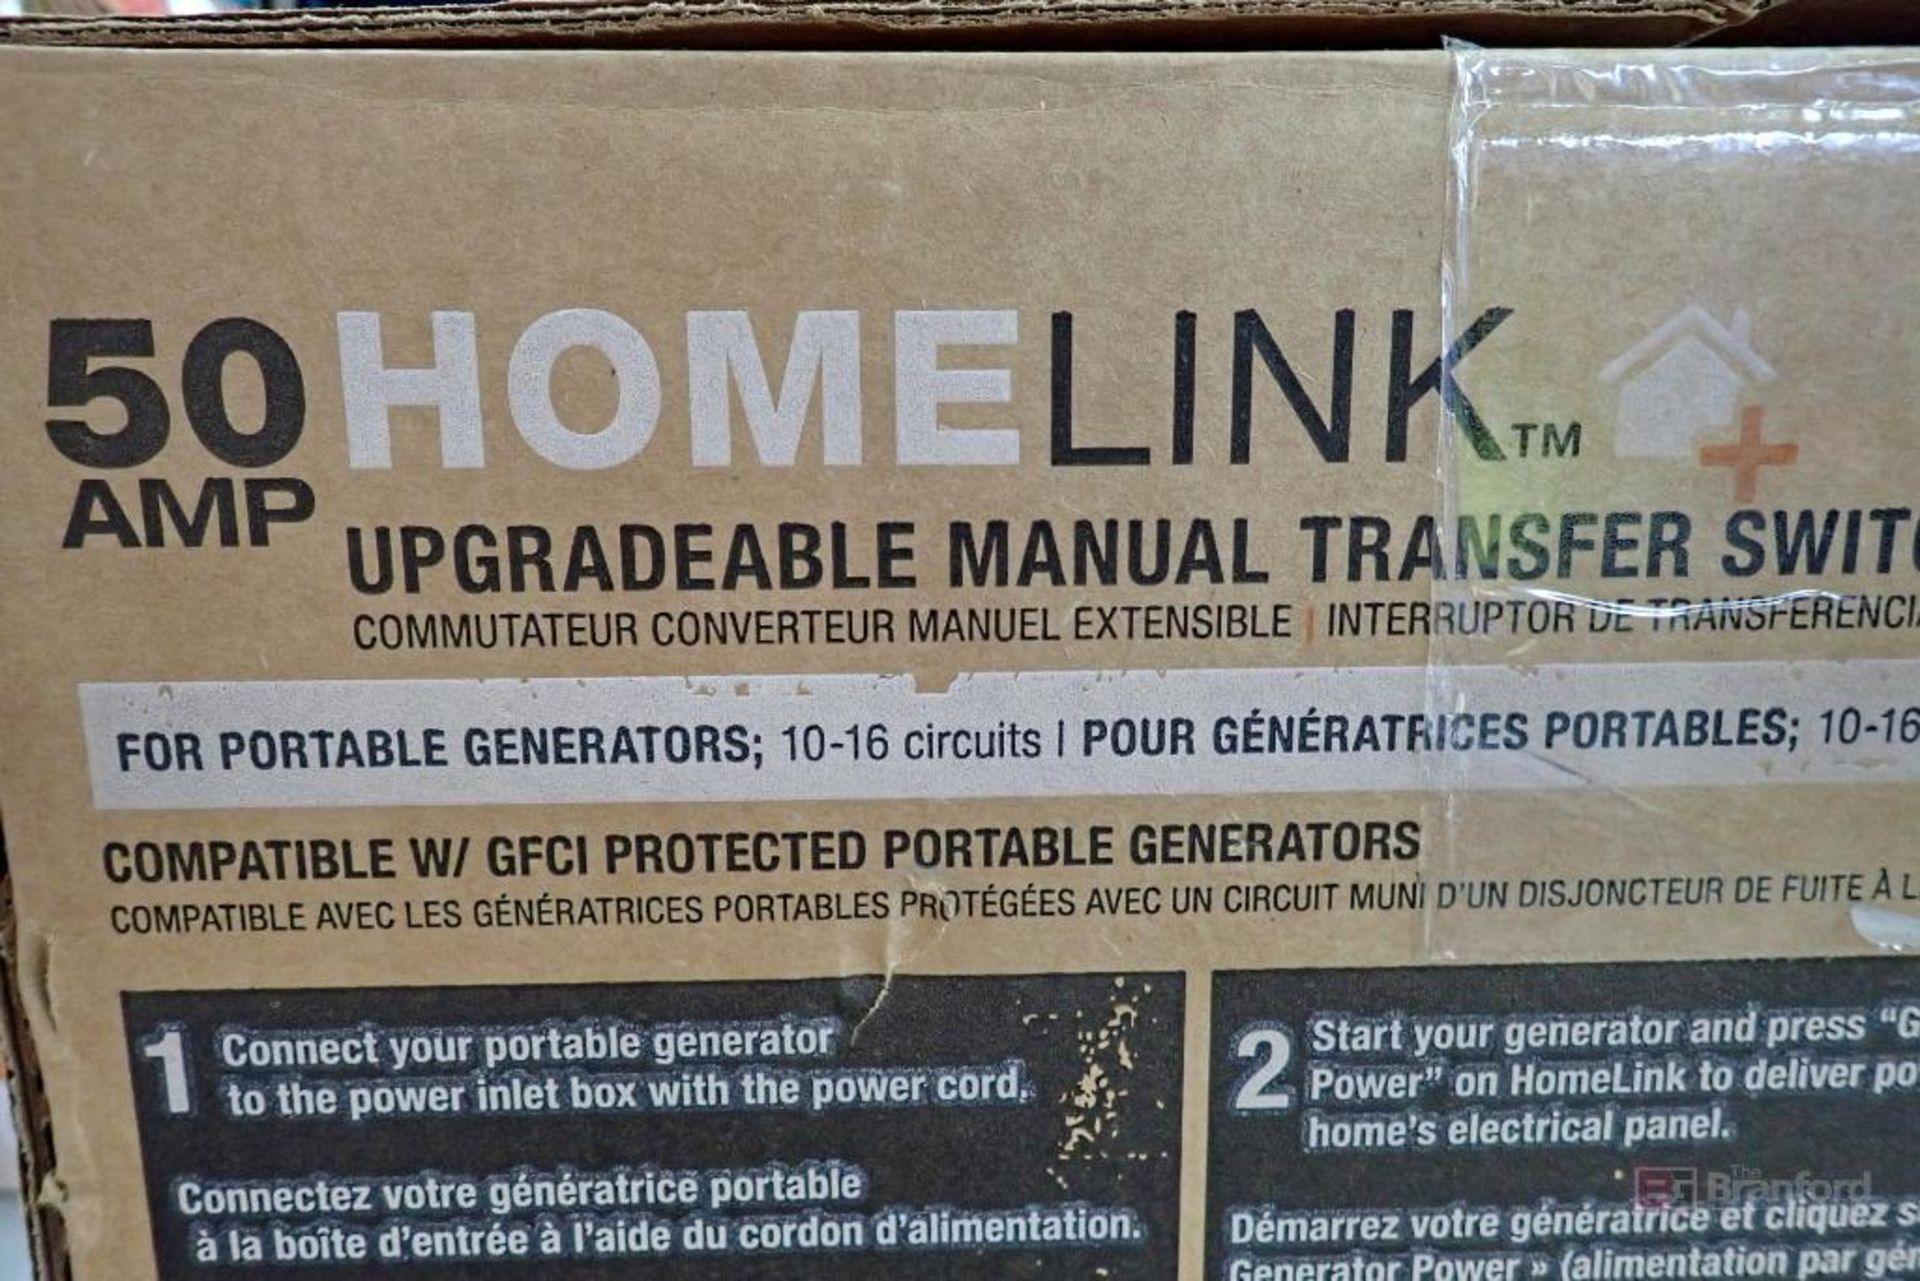 GENERAC GNR98550 HomeLink 50 AMP Upgradeable Manual Transfer Switch - Image 3 of 6